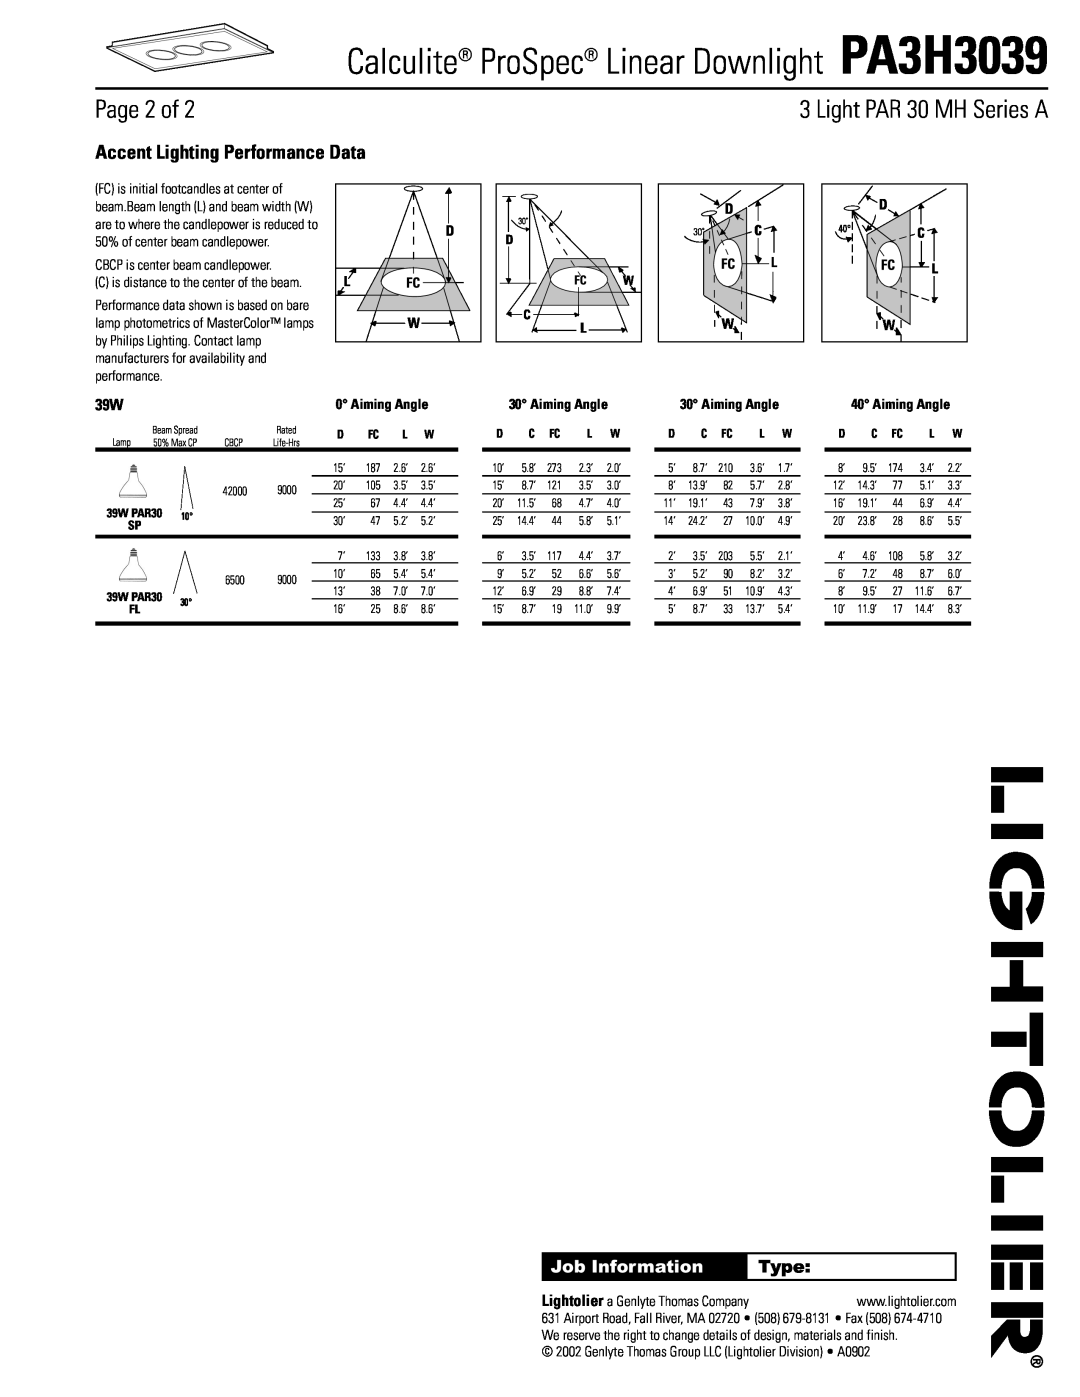 Lightolier Page 2 of, Accent Lighting Performance Data, Aiming Angle, Calculite ProSpec Linear Downlight PA3H3039, Type 